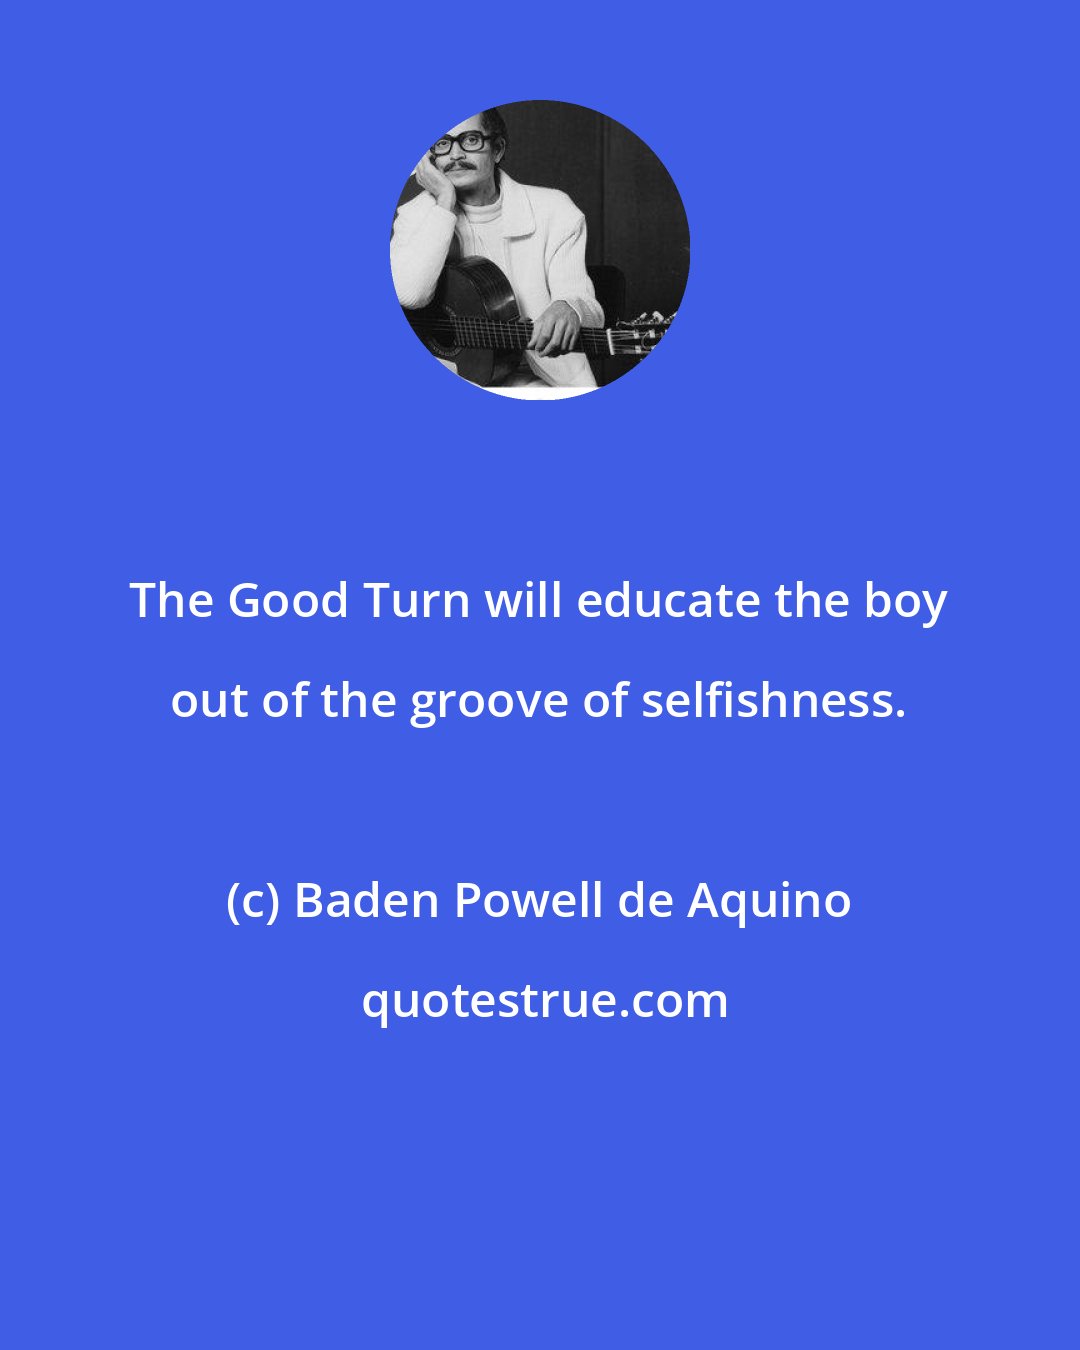 Baden Powell de Aquino: The Good Turn will educate the boy out of the groove of selfishness.